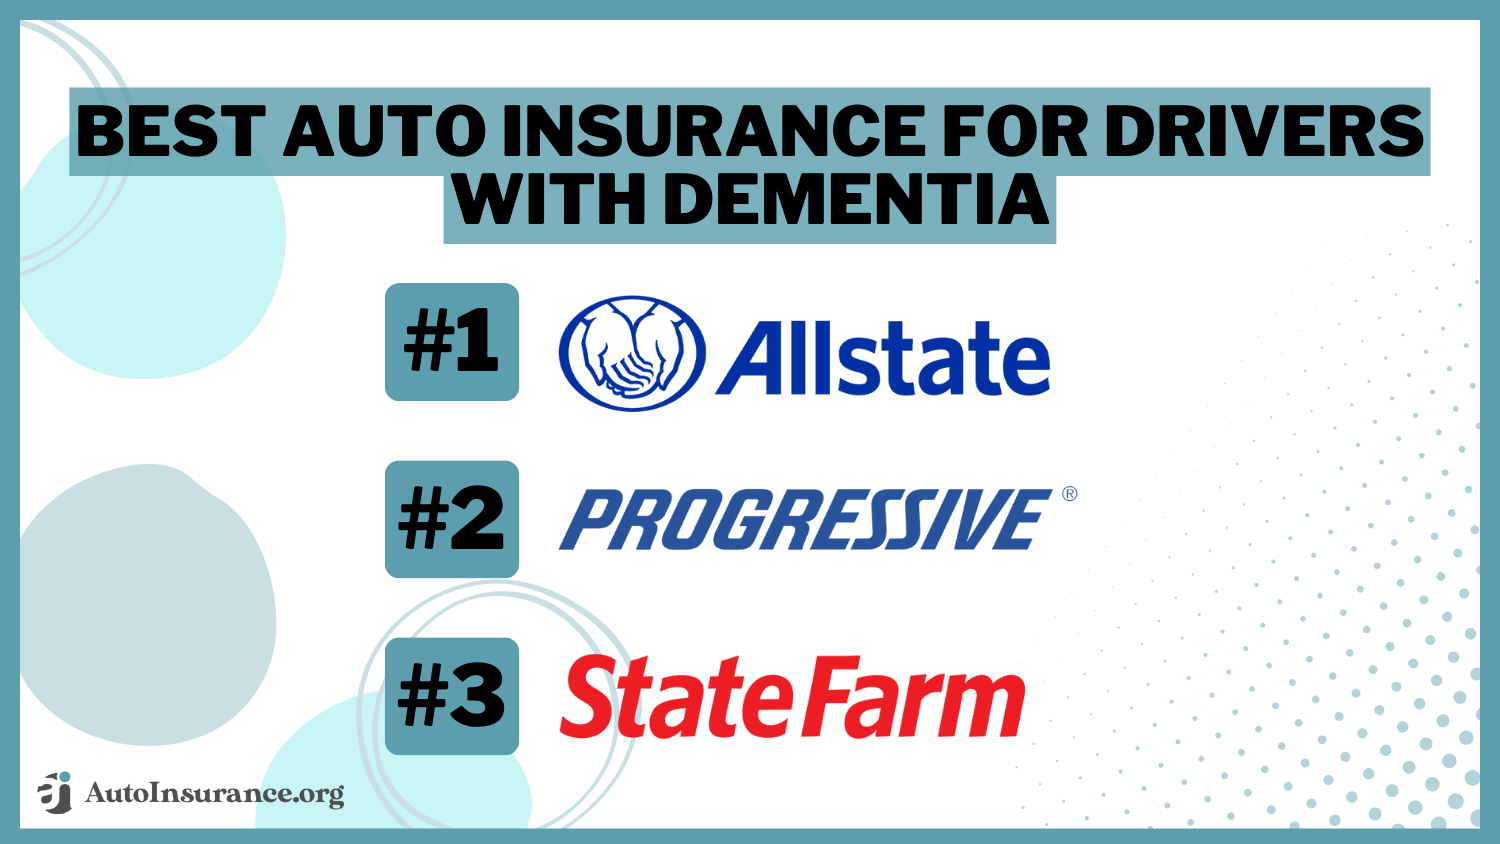 Best Auto Insurance for Drivers with Dementia: Allstate, Progressive, and State Farm